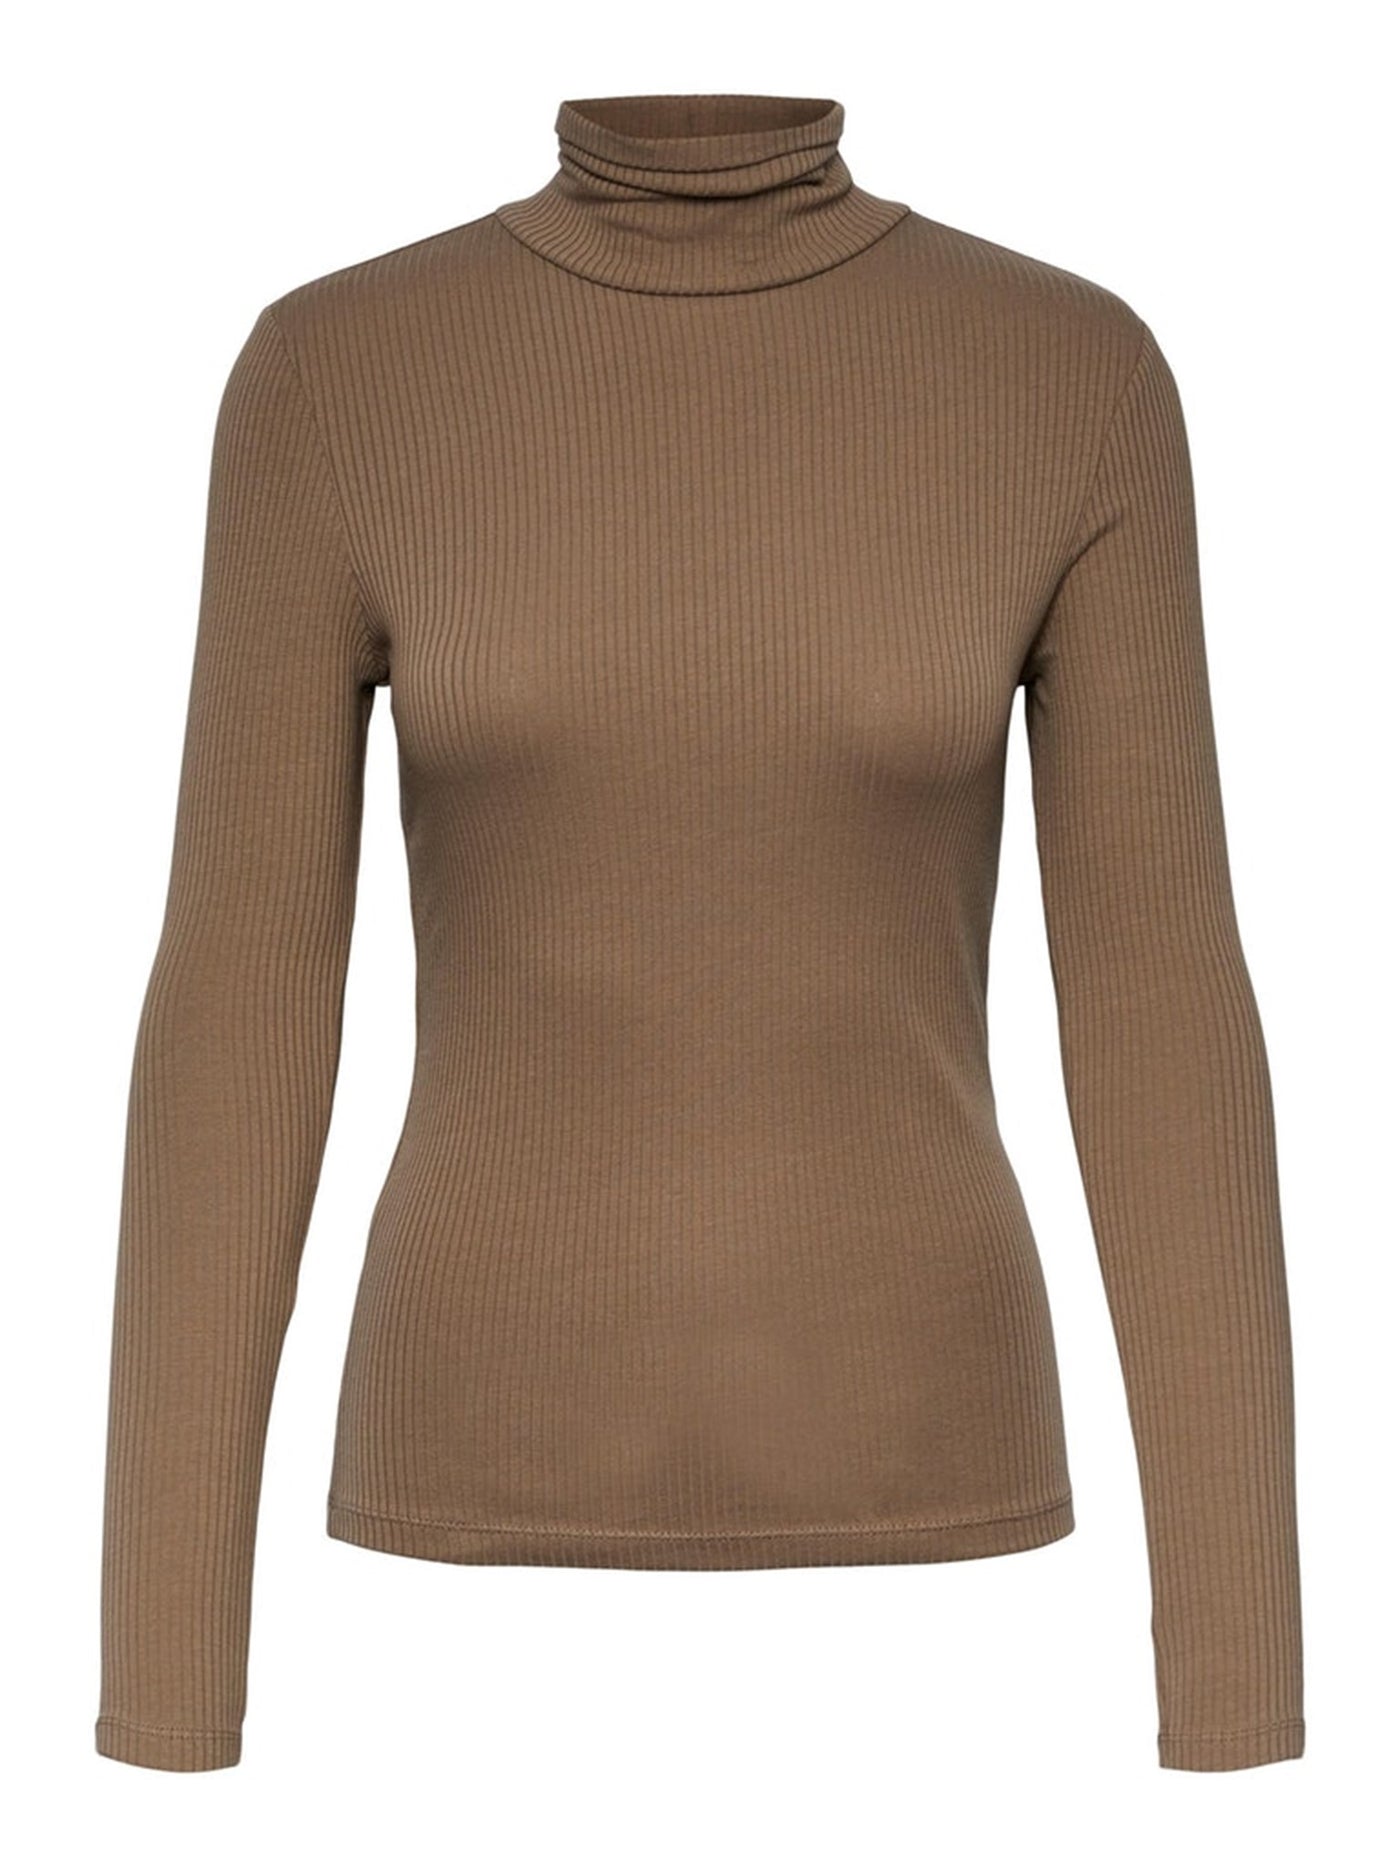 Kitte Rollneck Top - Fossil - PIECES - Braun 5